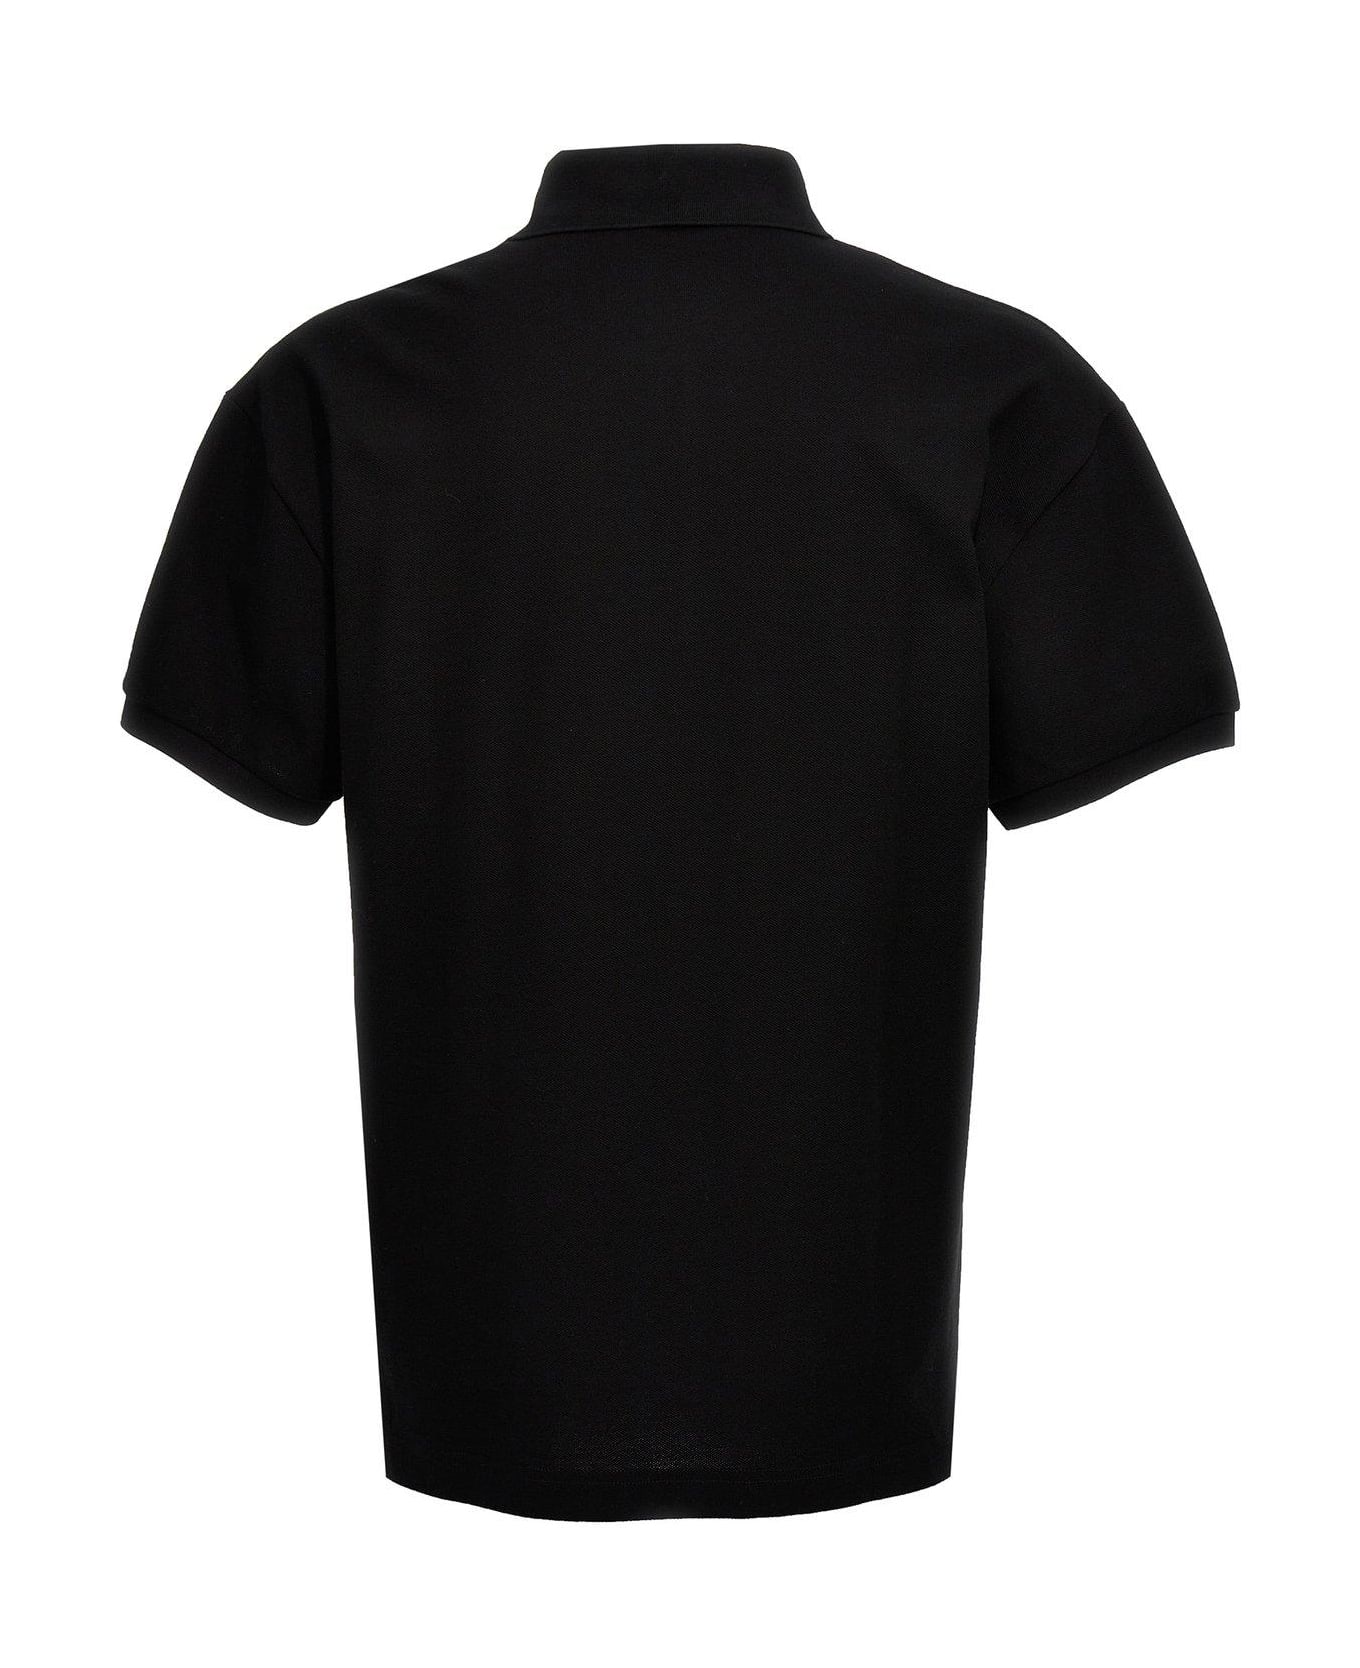 Palm Angels Monogram Embroidered Short-sleeved Polo Shirt - Black